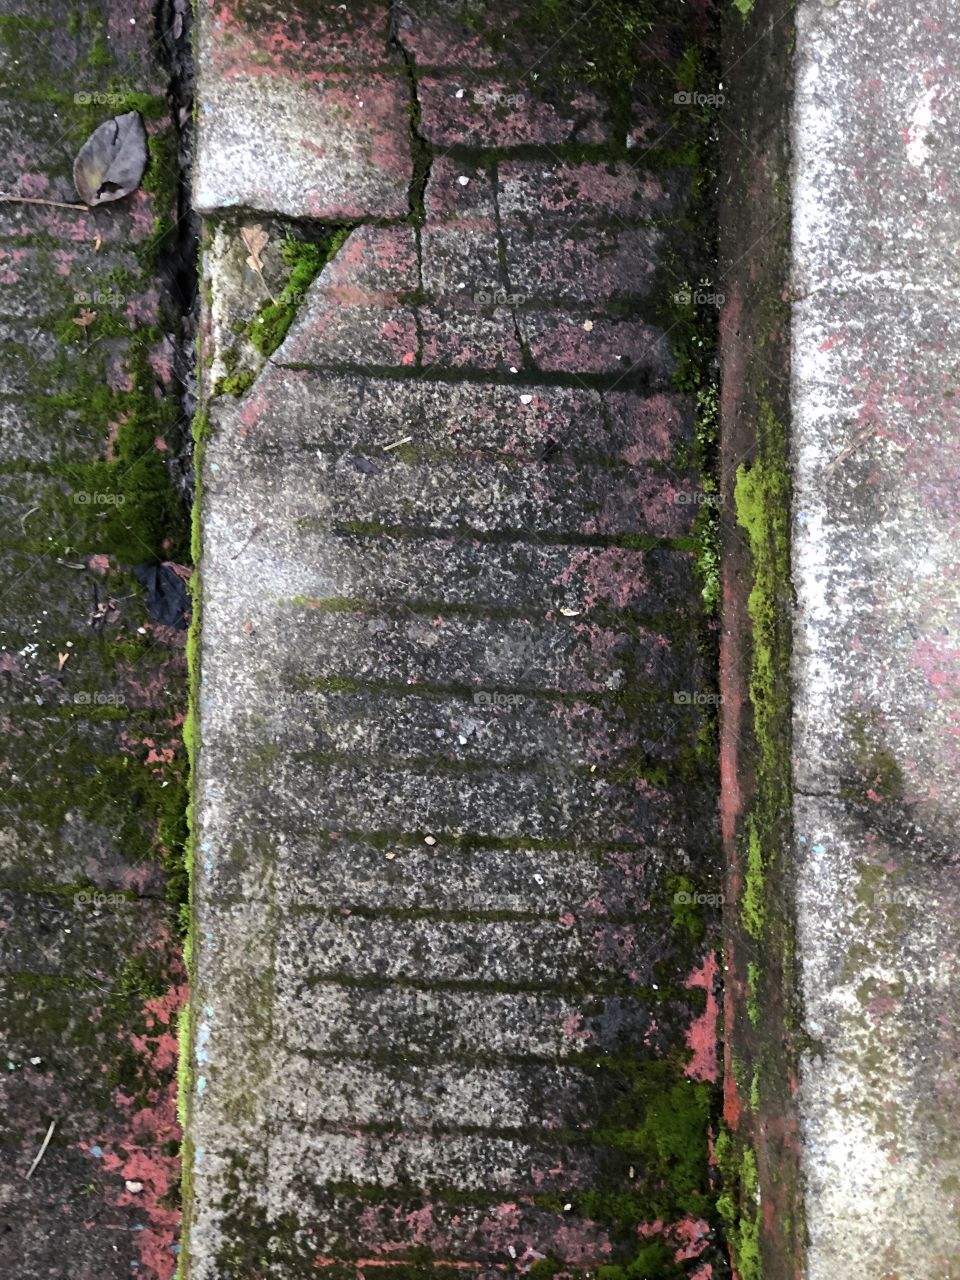 Steps from an aerial view can be rather intriguing. These particular ones have moss, old paint, and other patterning to help the appeal. 